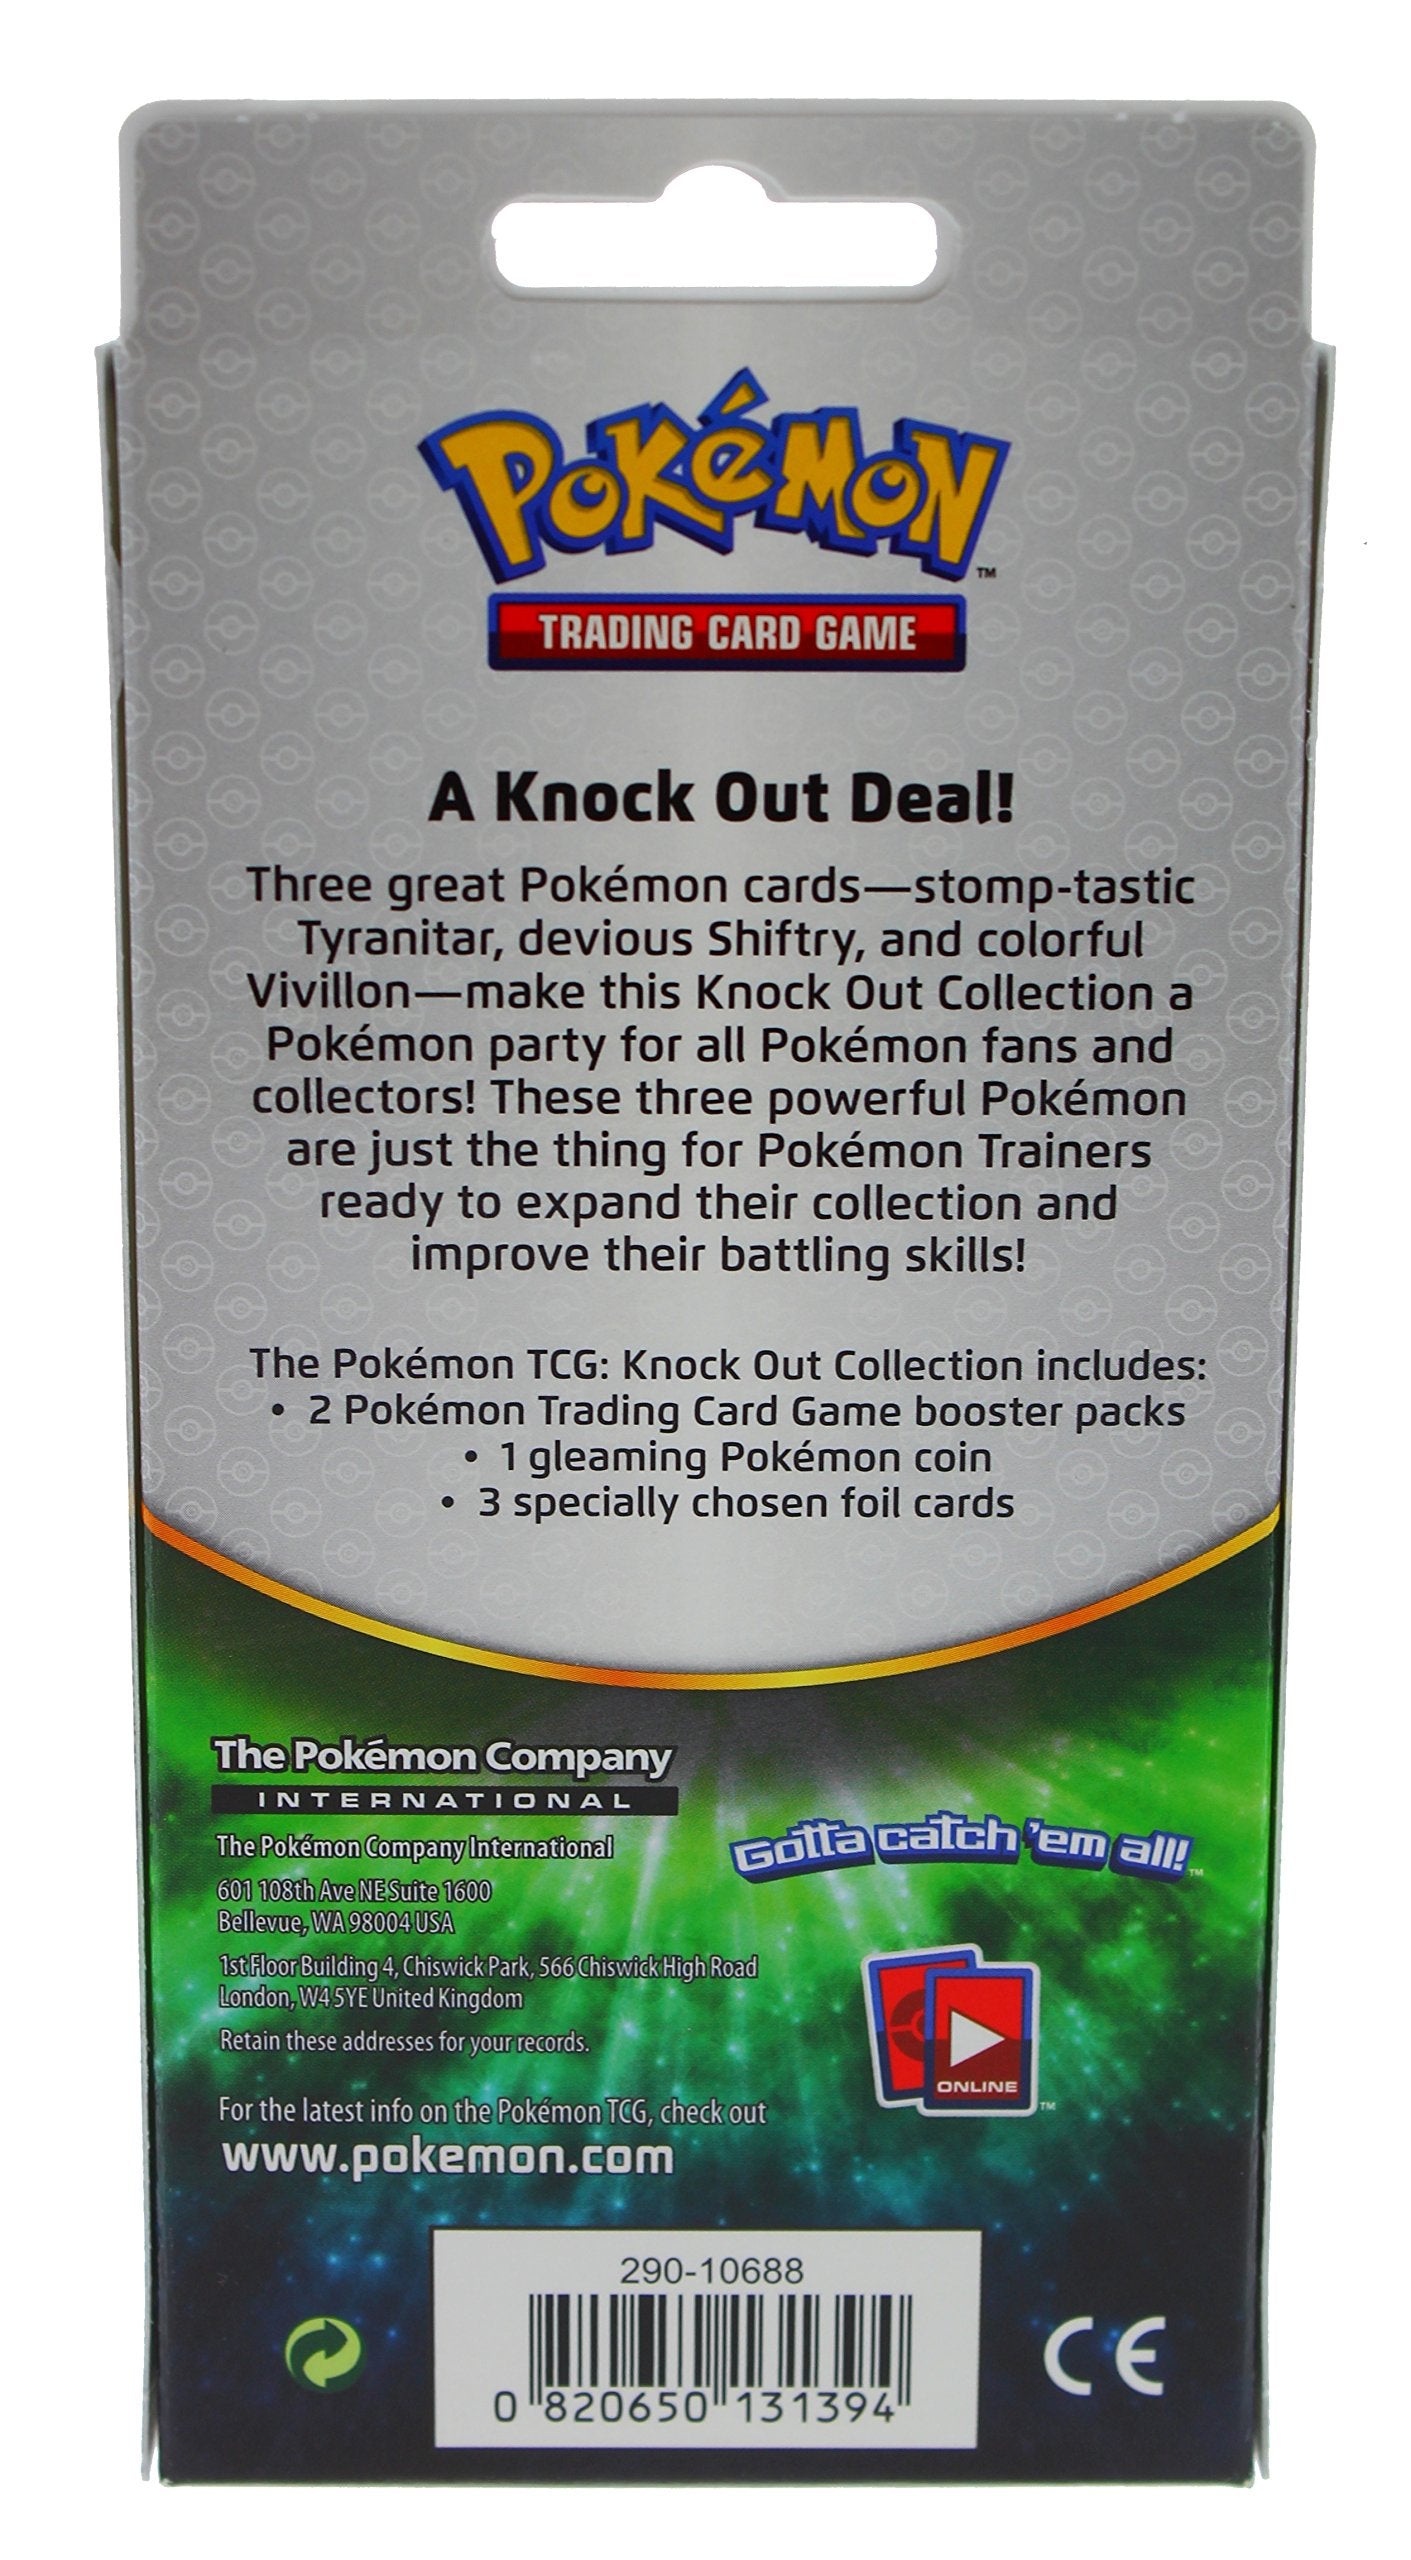 Pokemon TCG: Knock Out Collection Random Deal | Get 3 Rare Foil Lucario, Bisharp, and Zoroark OR Tyranitar, Shiftry and Vivillon | Plus 2 Booster Packs Trading Card Set